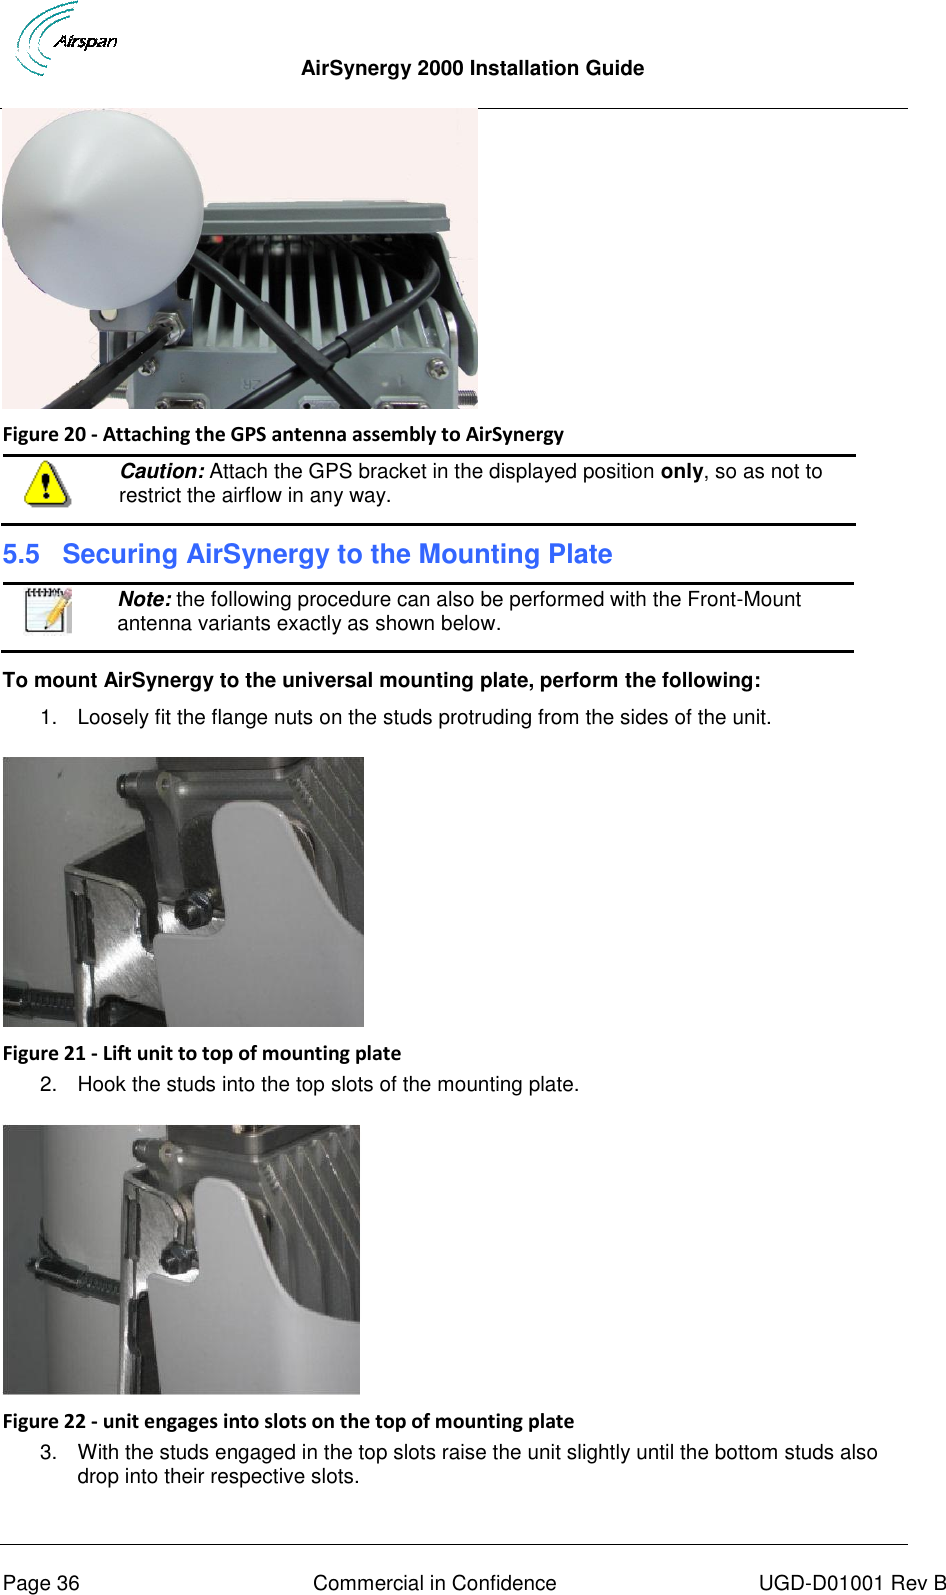  AirSynergy 2000 Installation Guide     Page 36  Commercial in Confidence  UGD-D01001 Rev B  Figure 20 - Attaching the GPS antenna assembly to AirSynergy  Caution: Attach the GPS bracket in the displayed position only, so as not to restrict the airflow in any way. 5.5  Securing AirSynergy to the Mounting Plate  Note: the following procedure can also be performed with the Front-Mount antenna variants exactly as shown below.  To mount AirSynergy to the universal mounting plate, perform the following: 1.  Loosely fit the flange nuts on the studs protruding from the sides of the unit.    Figure 21 - Lift unit to top of mounting plate 2.  Hook the studs into the top slots of the mounting plate.   Figure 22 - unit engages into slots on the top of mounting plate 3.  With the studs engaged in the top slots raise the unit slightly until the bottom studs also drop into their respective slots. 